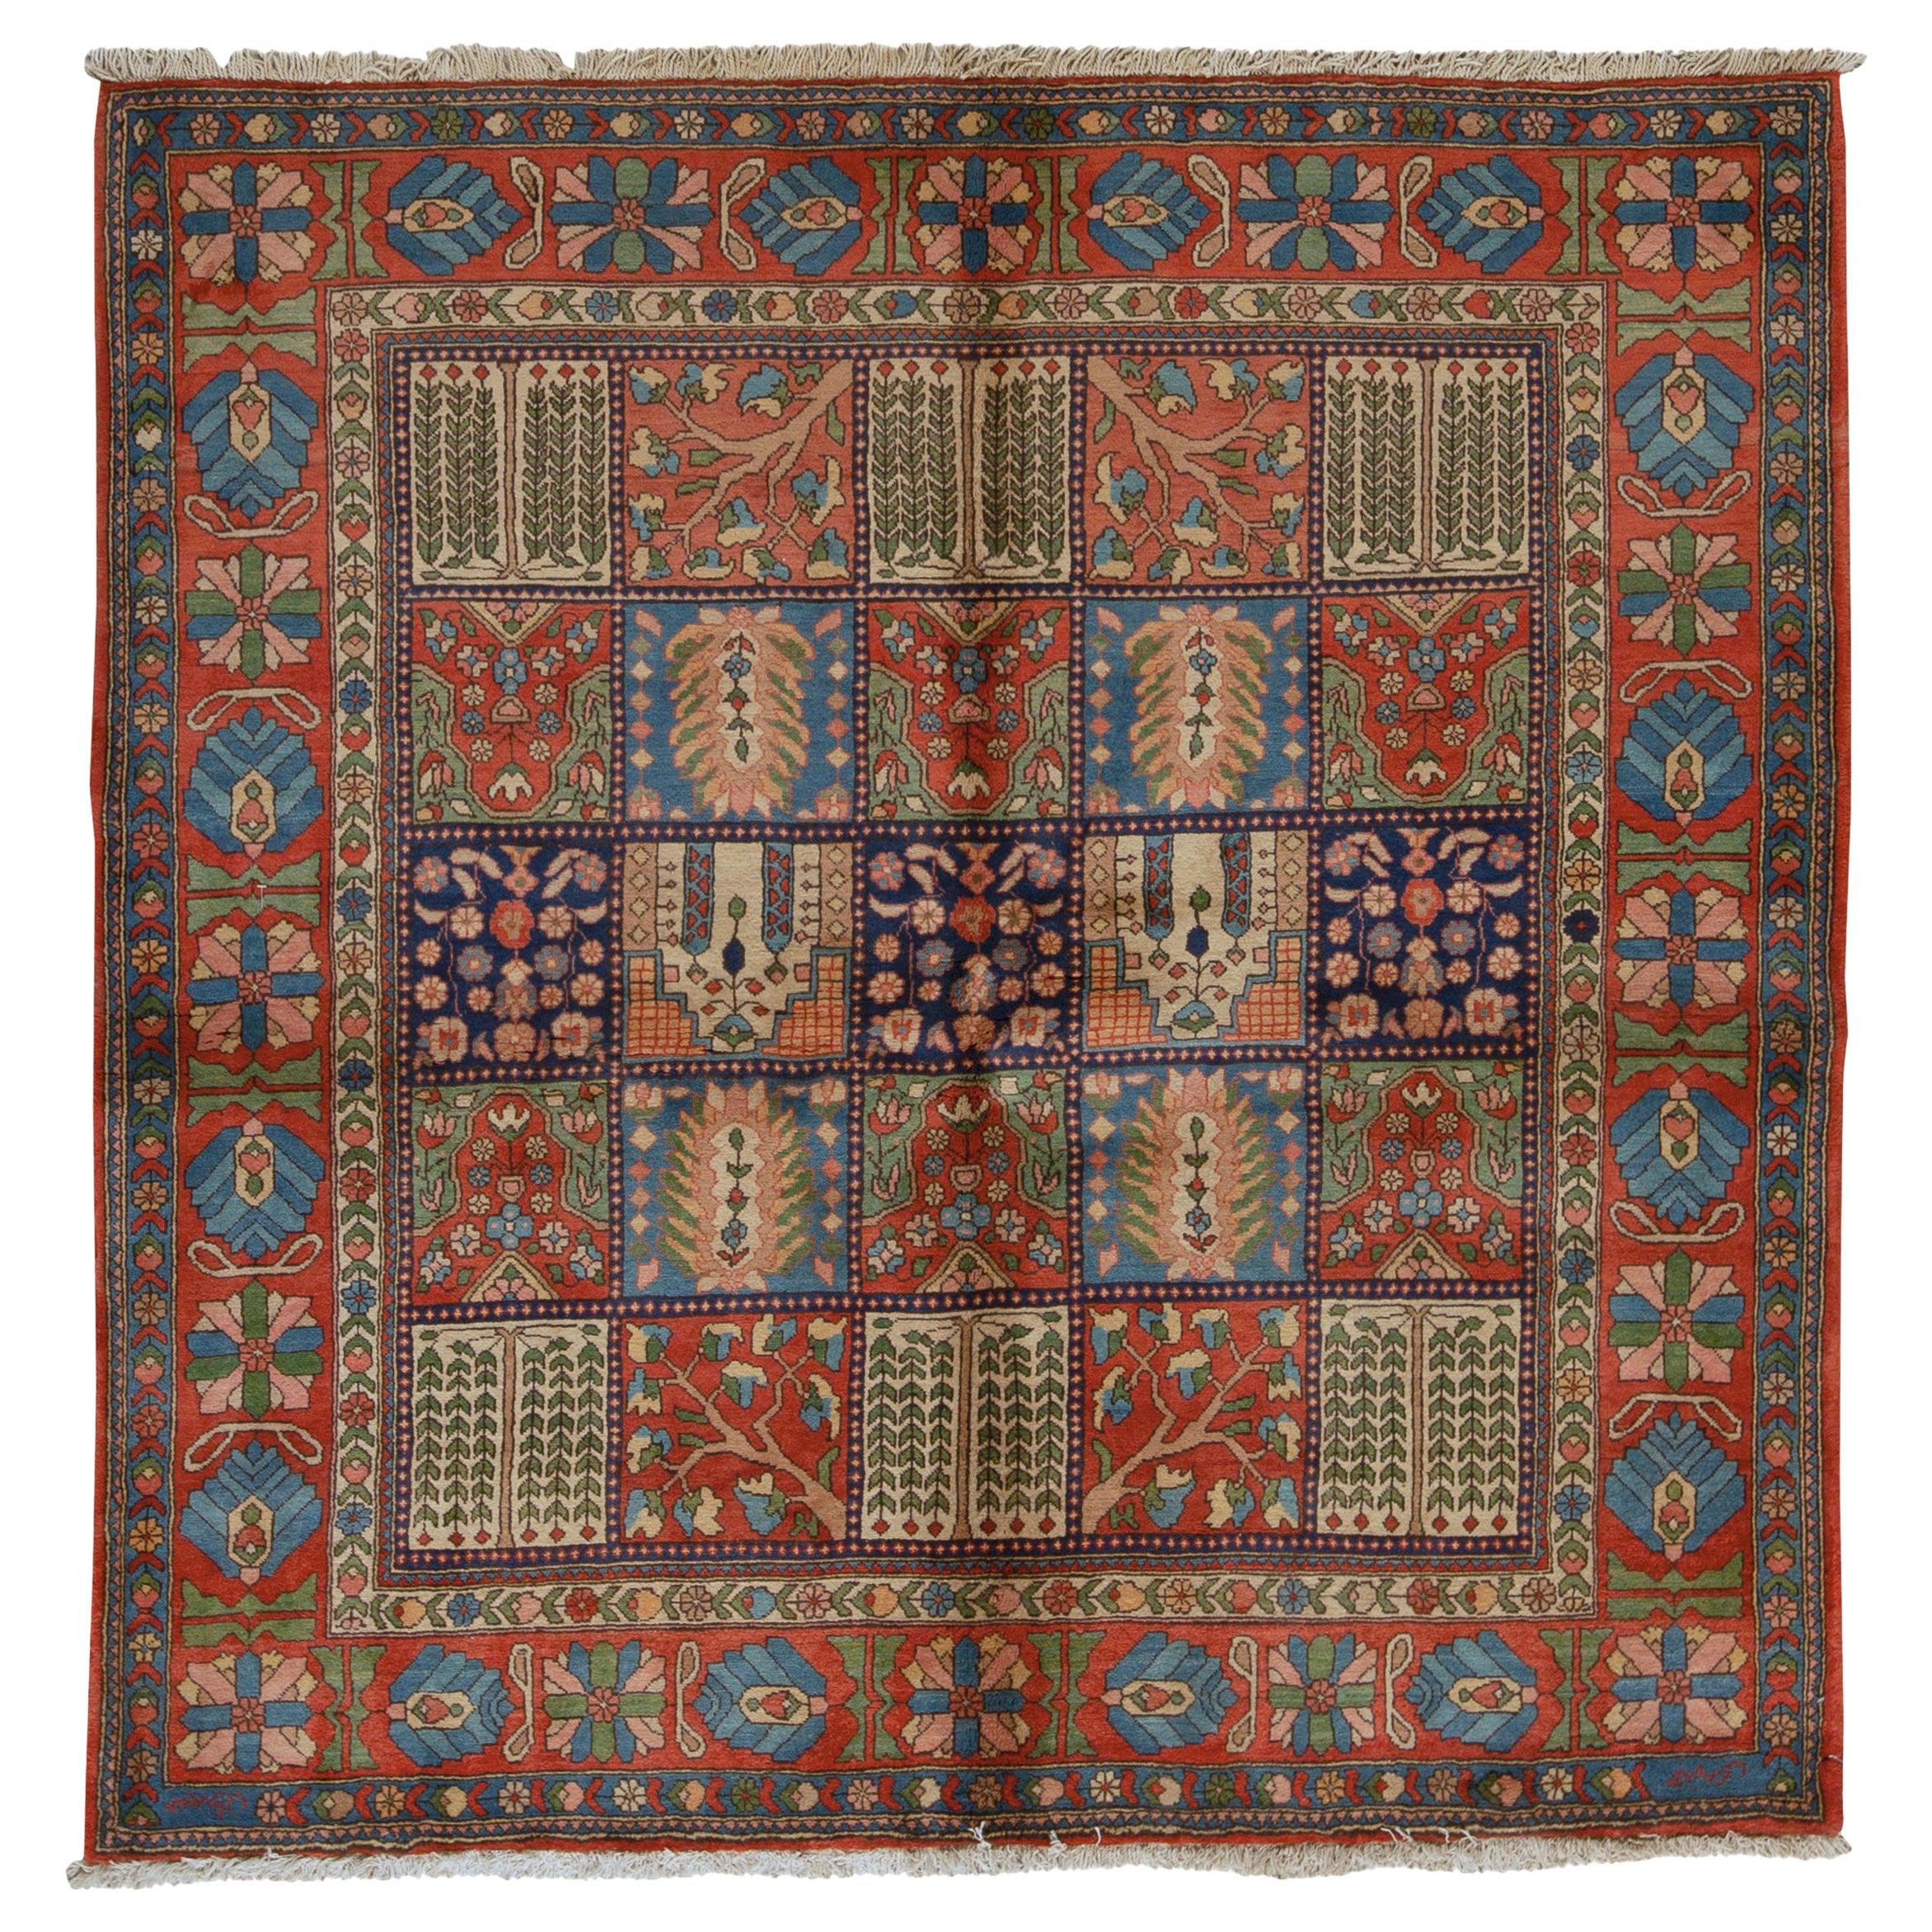   Antique Persian Fine Traditional Handwoven Luxury Wool Multi Square Rug  For Sale